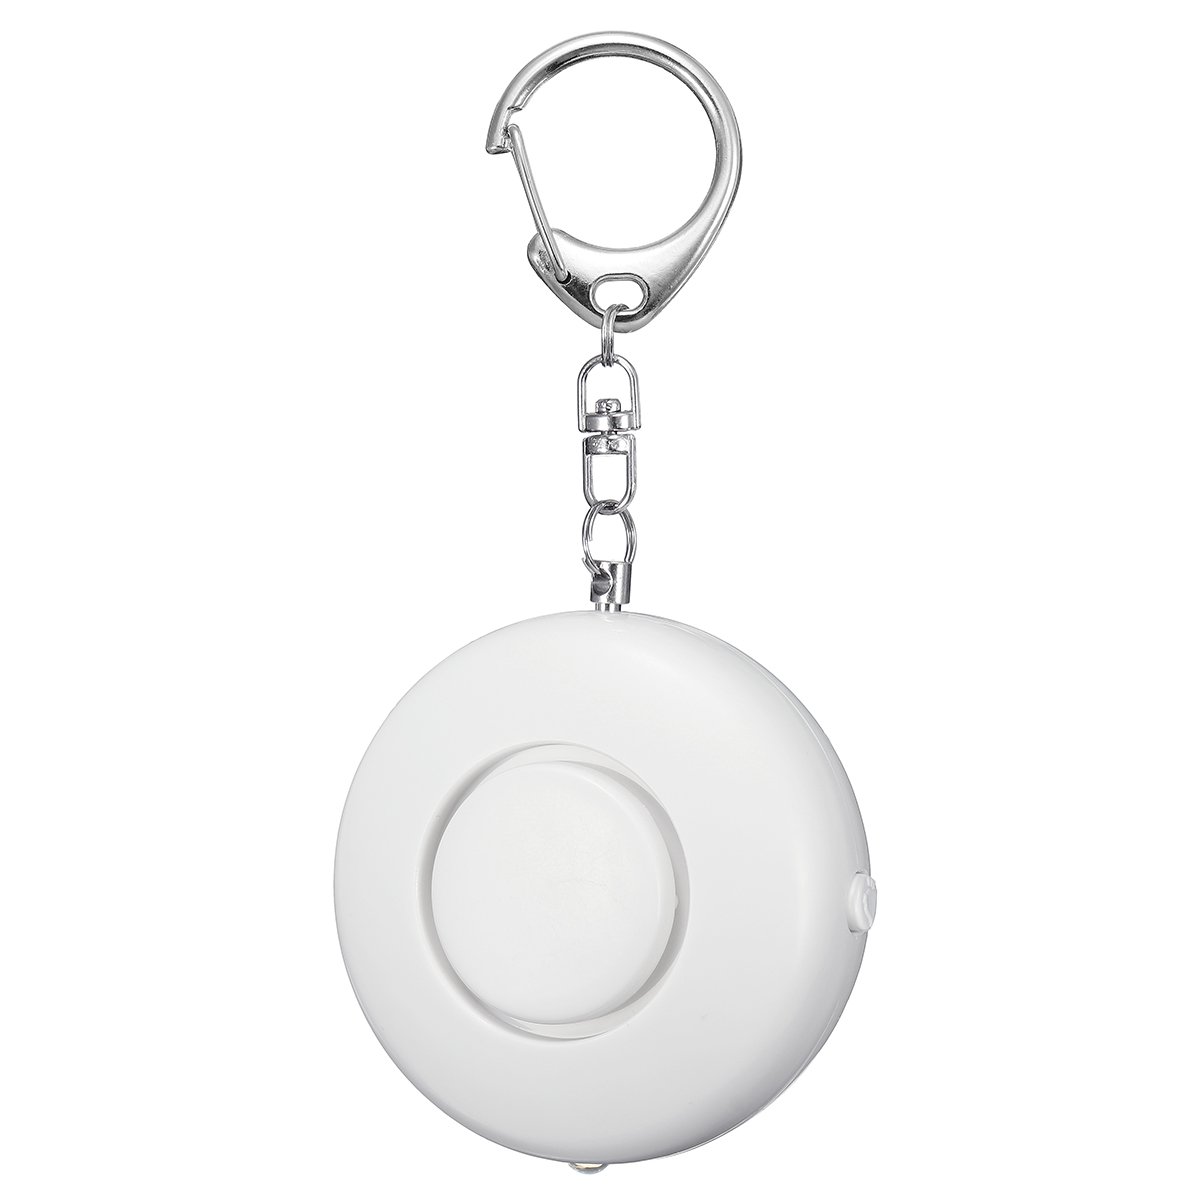 125dB Loud Portable Round Shape Bag Keychain Anti Theft Personal Security Alarm with Bright LED Light 2